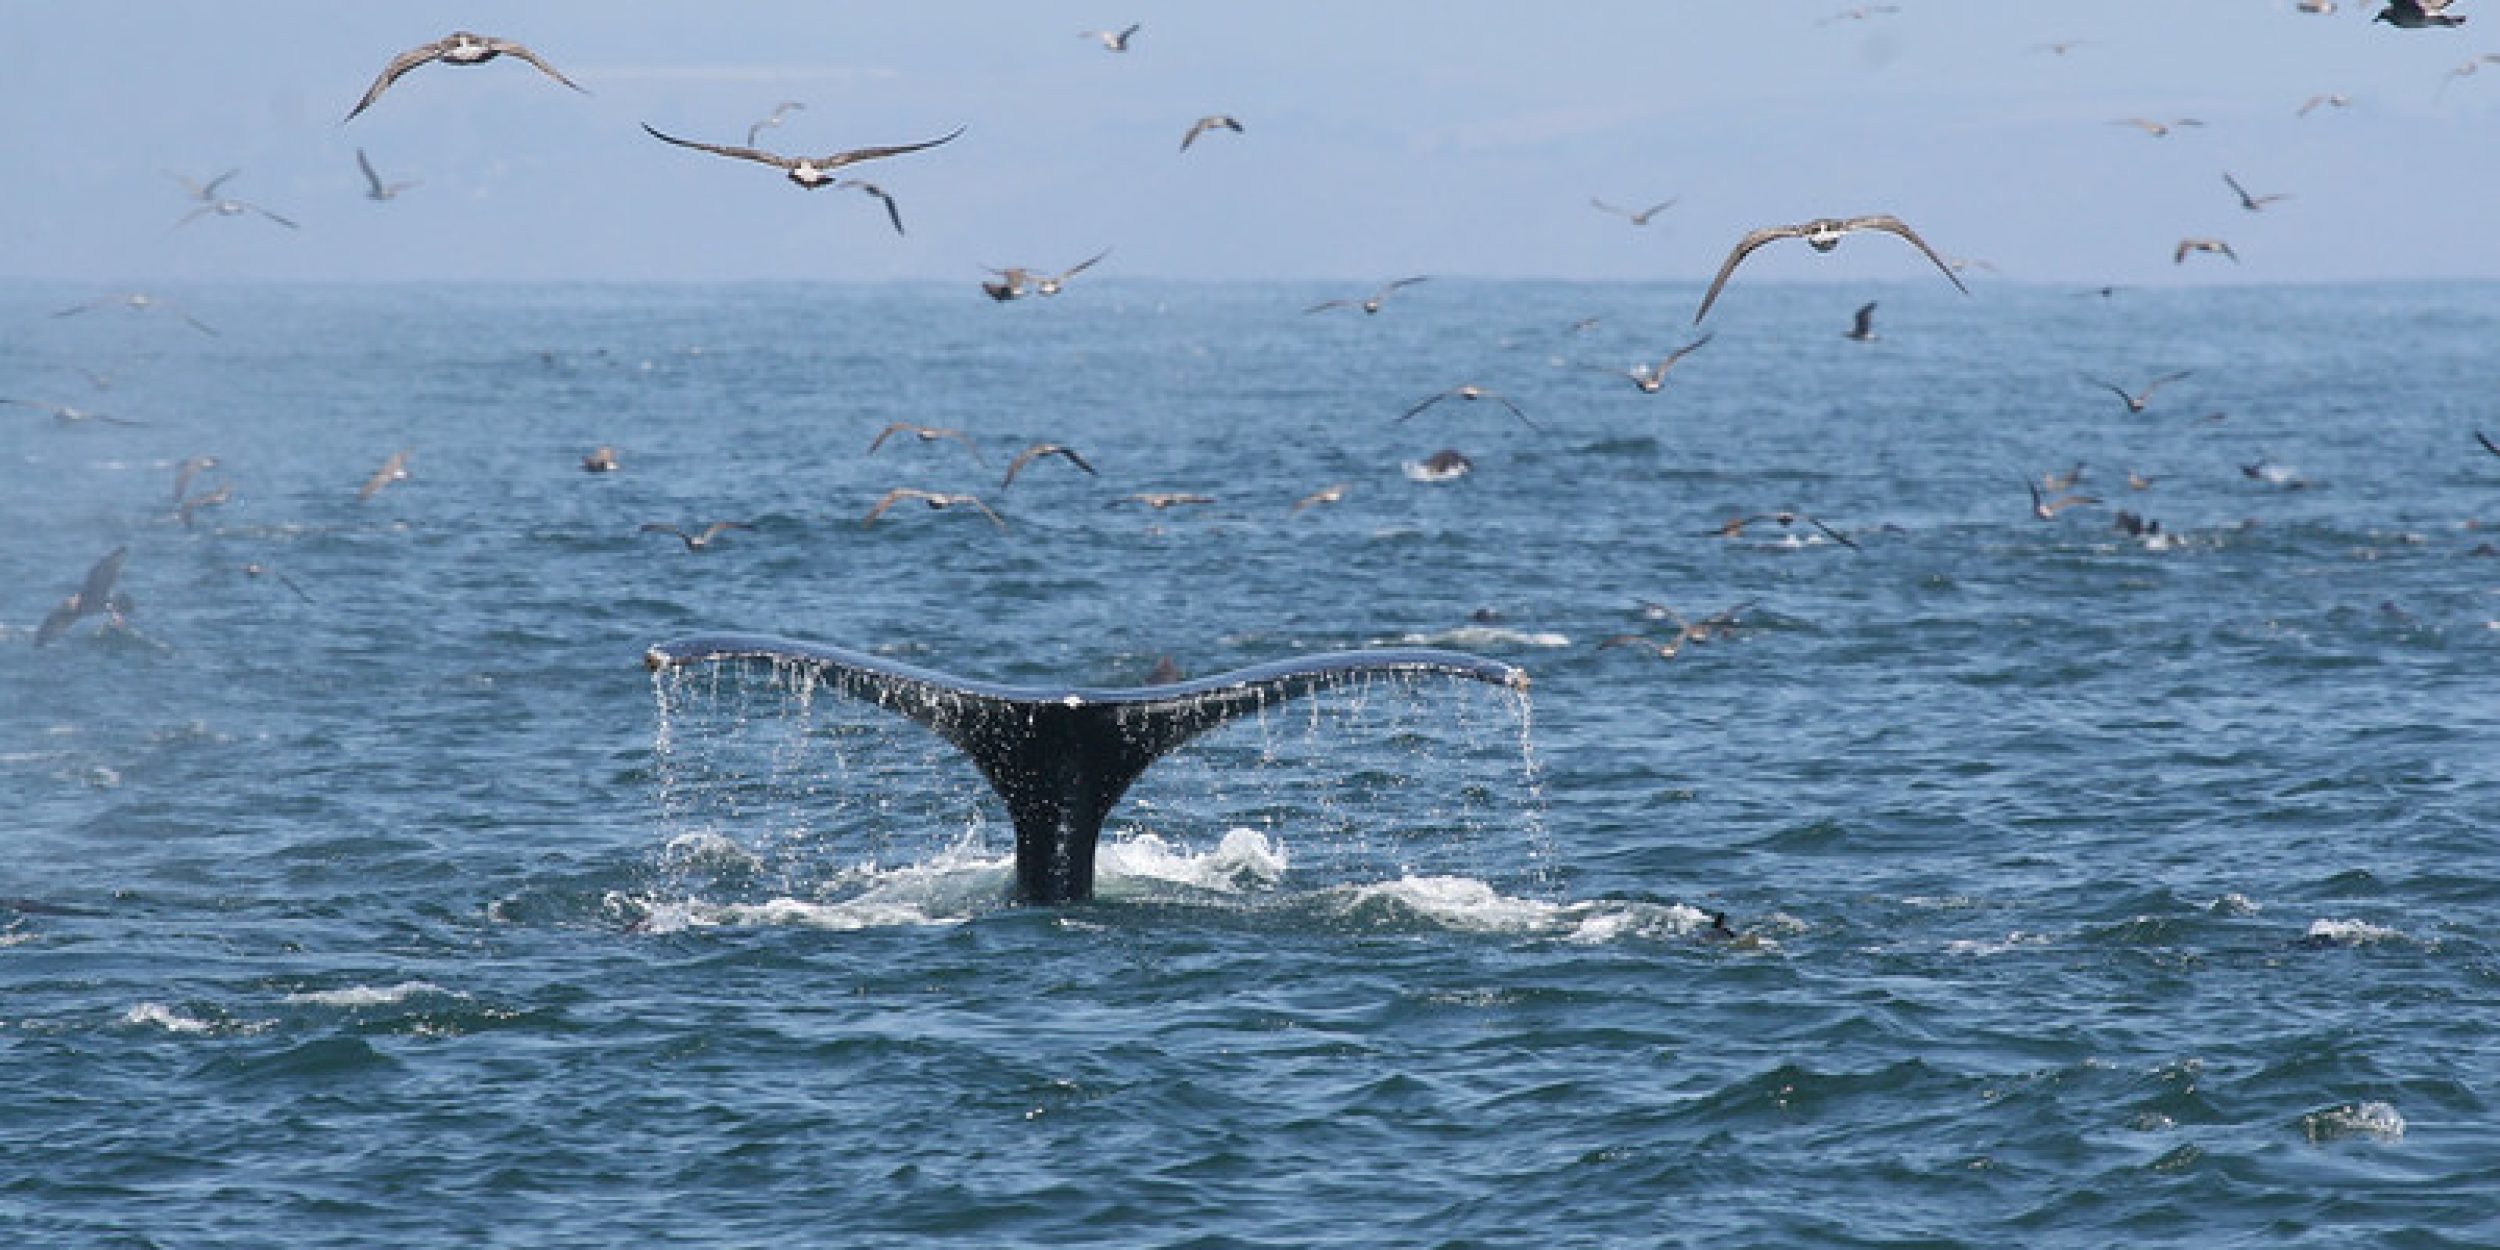 whale tail appearing above the ocean with seagulls flying around